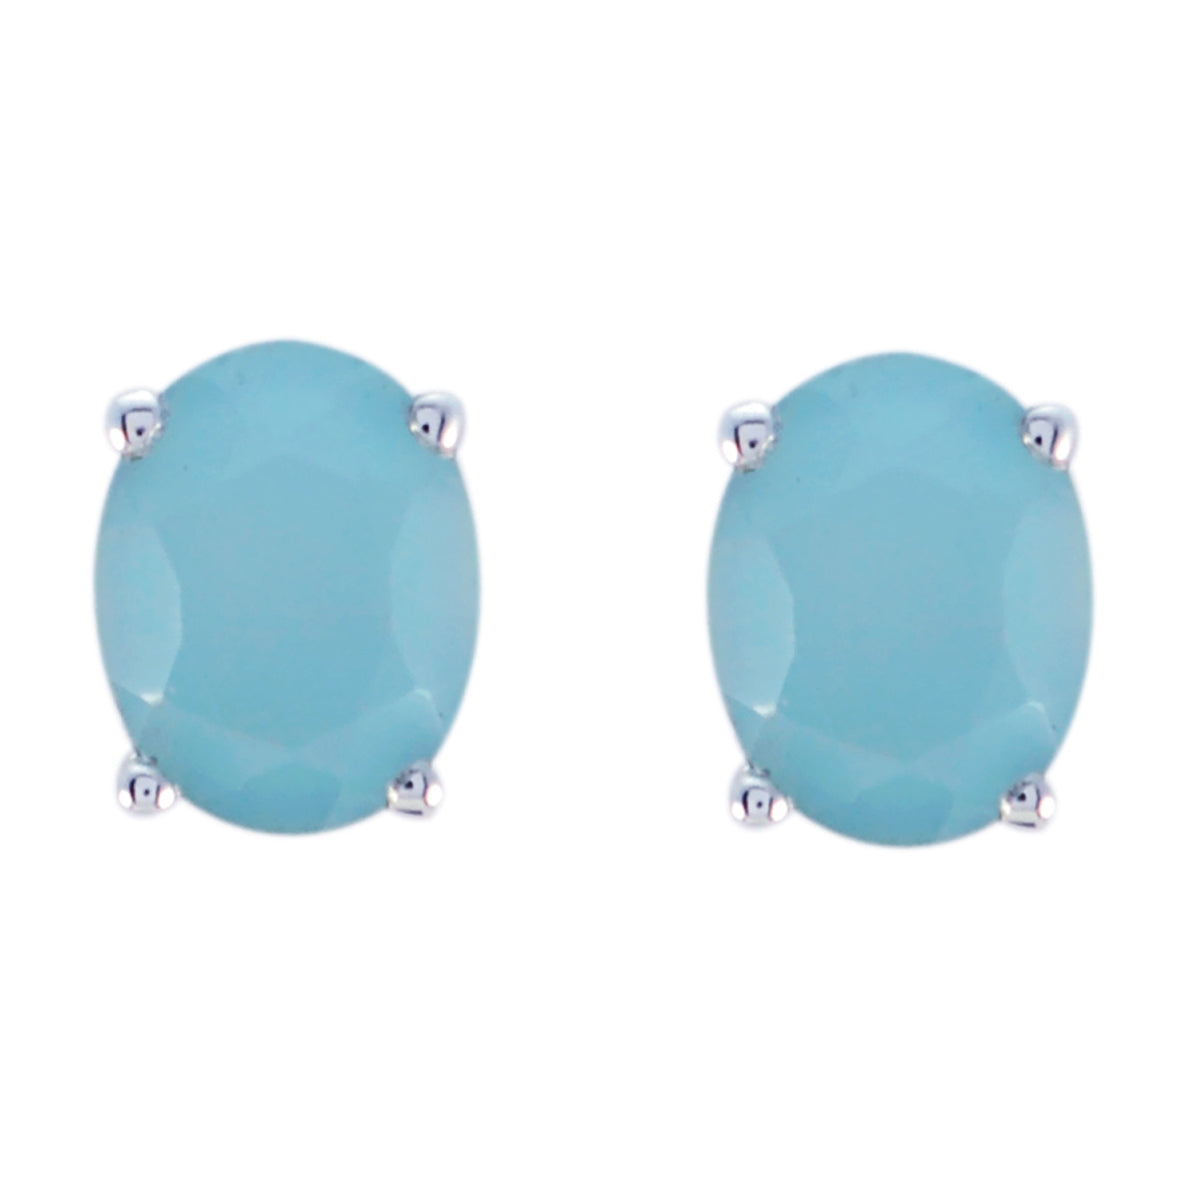 Riyo Real Gemstones oval Faceted Blue Chalcedony Silver Earrings gift for valentine's day